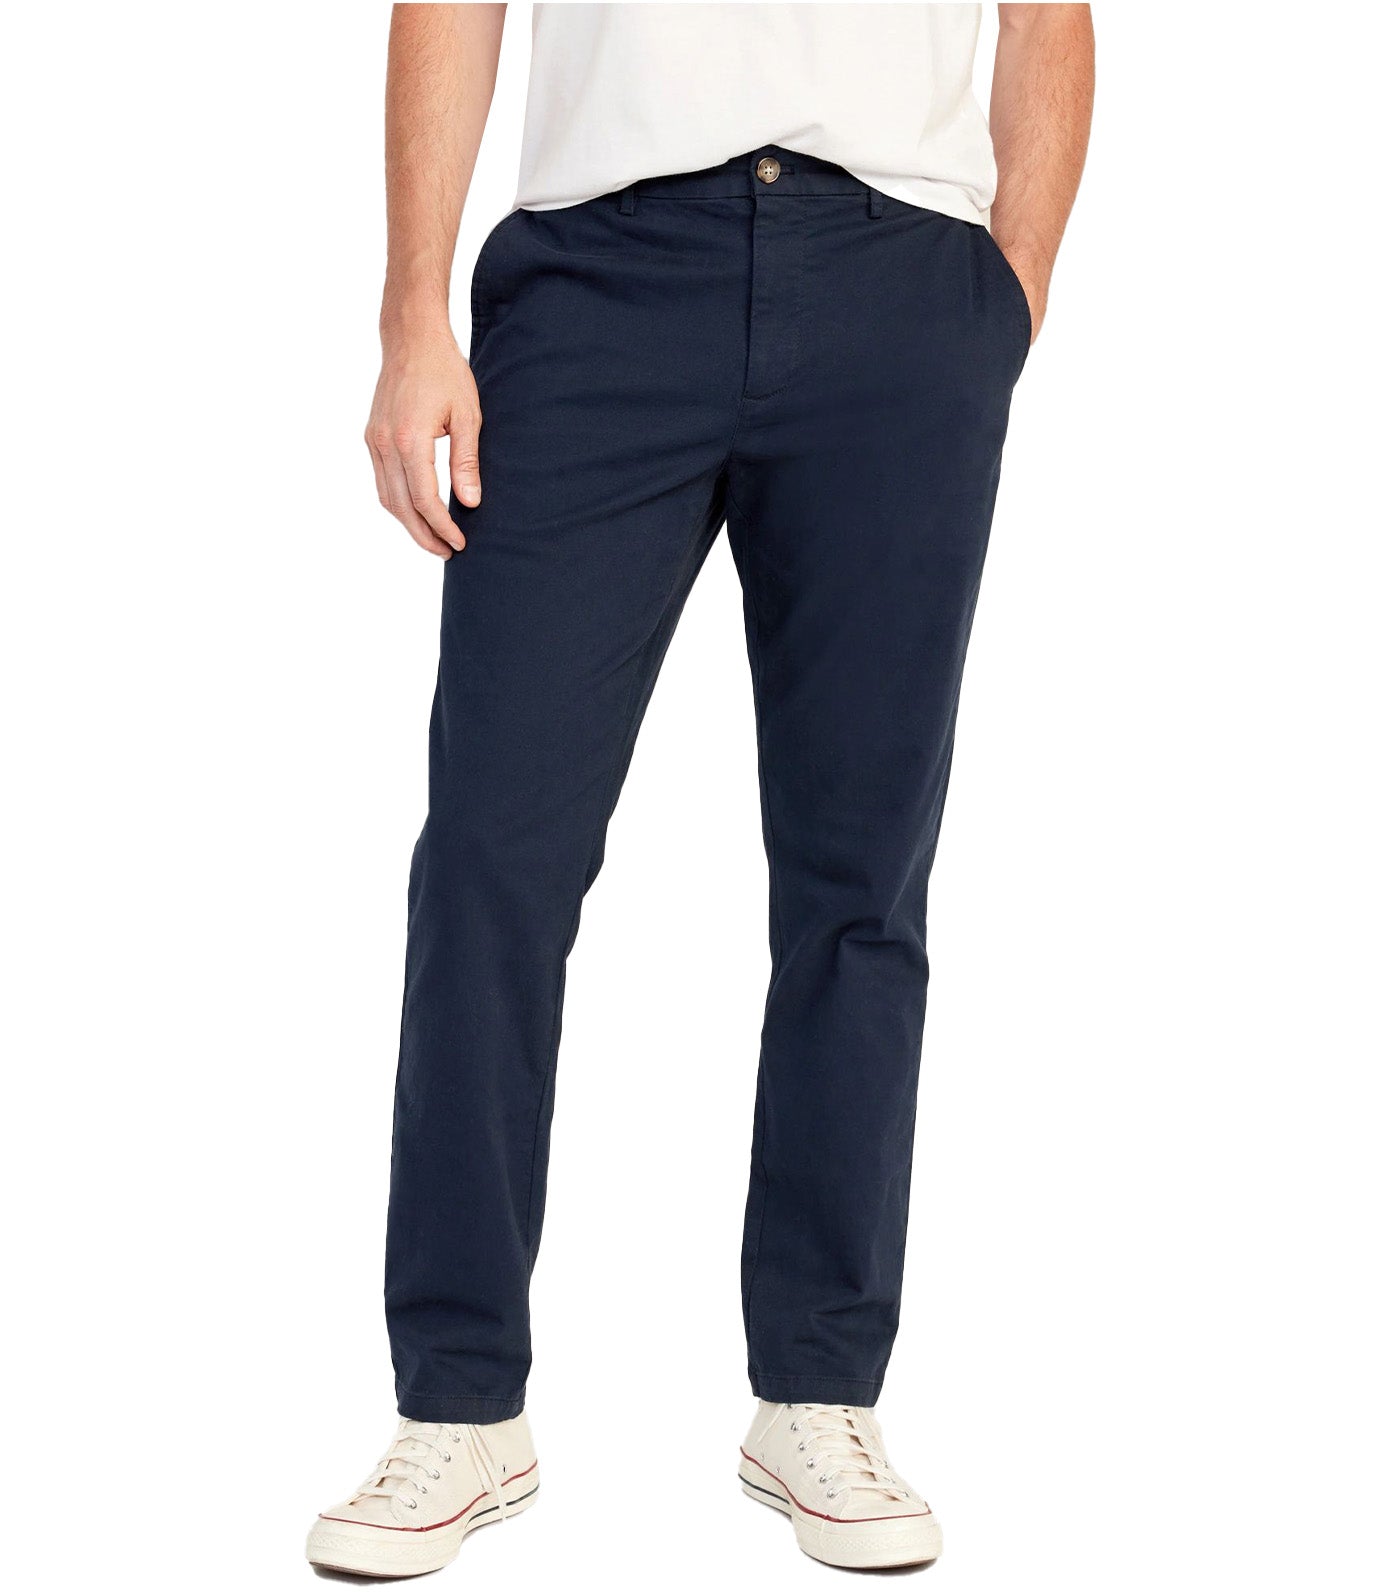 Slim Built-In Flex Rotation Chino Pants for Men In The Navy